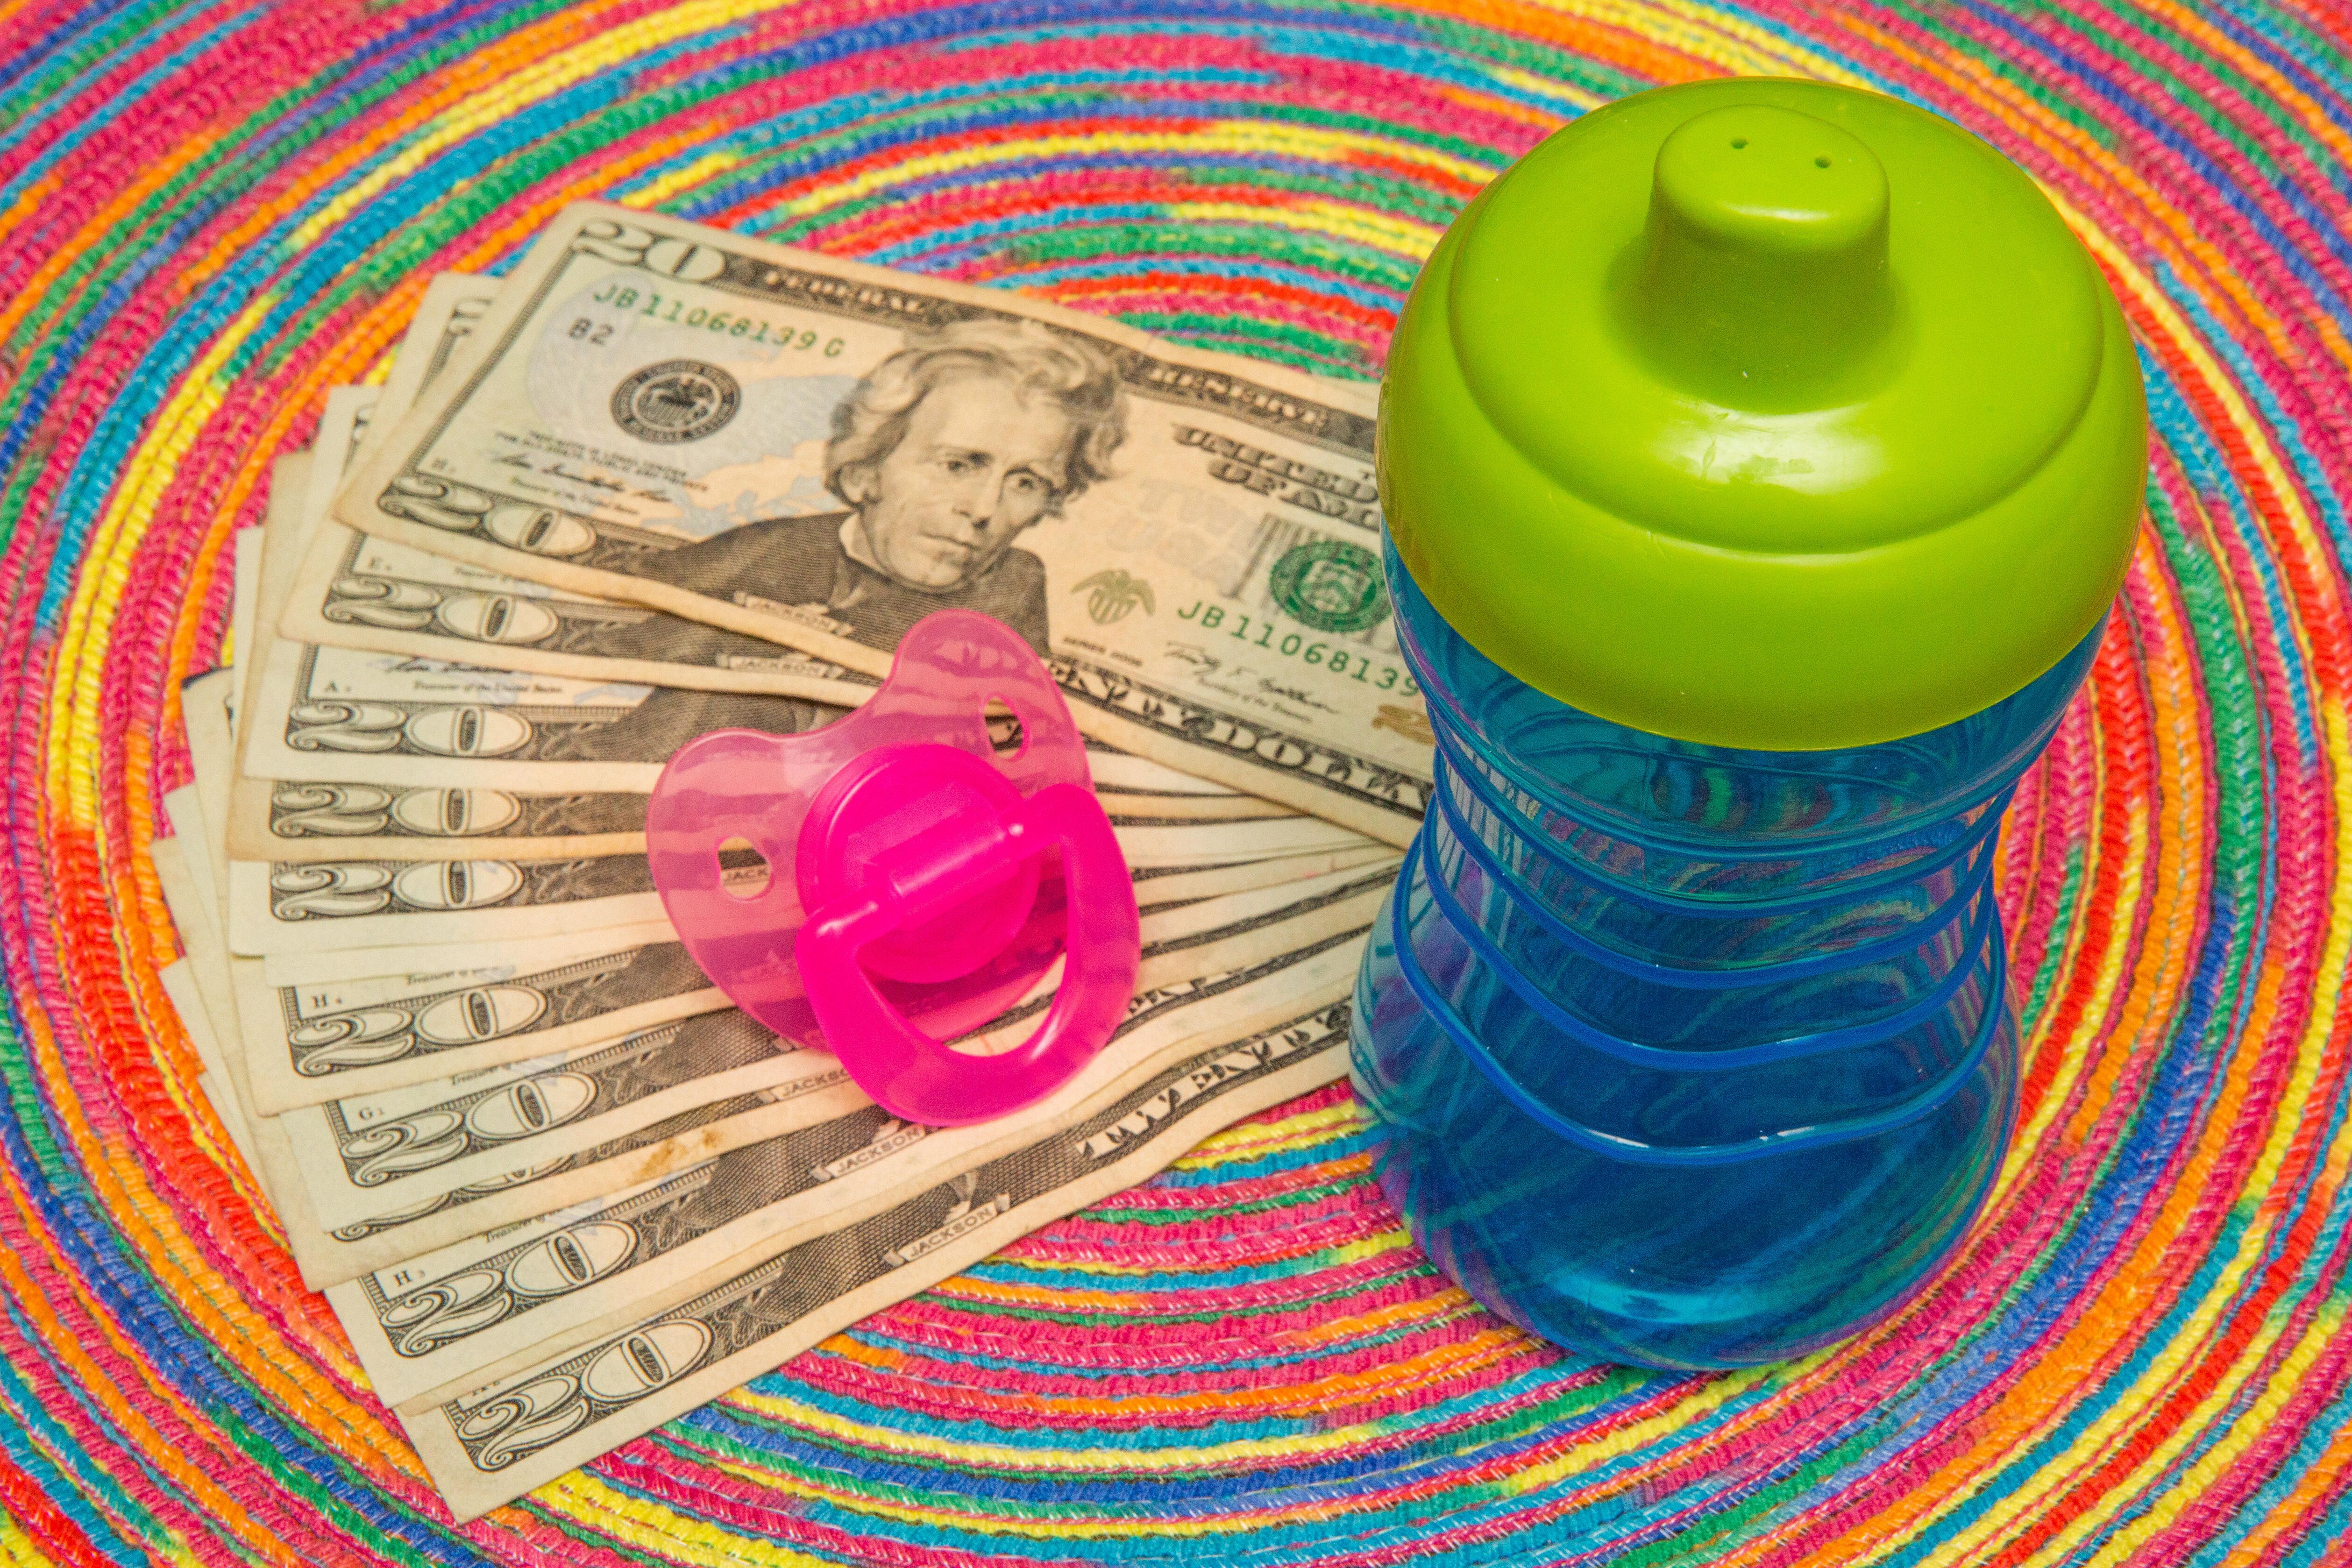 001-cash-stimulus-child-tax-credit-3600-calculator-cnet-2021-2020-federal-government-money-baby-family-pacifier-sippy